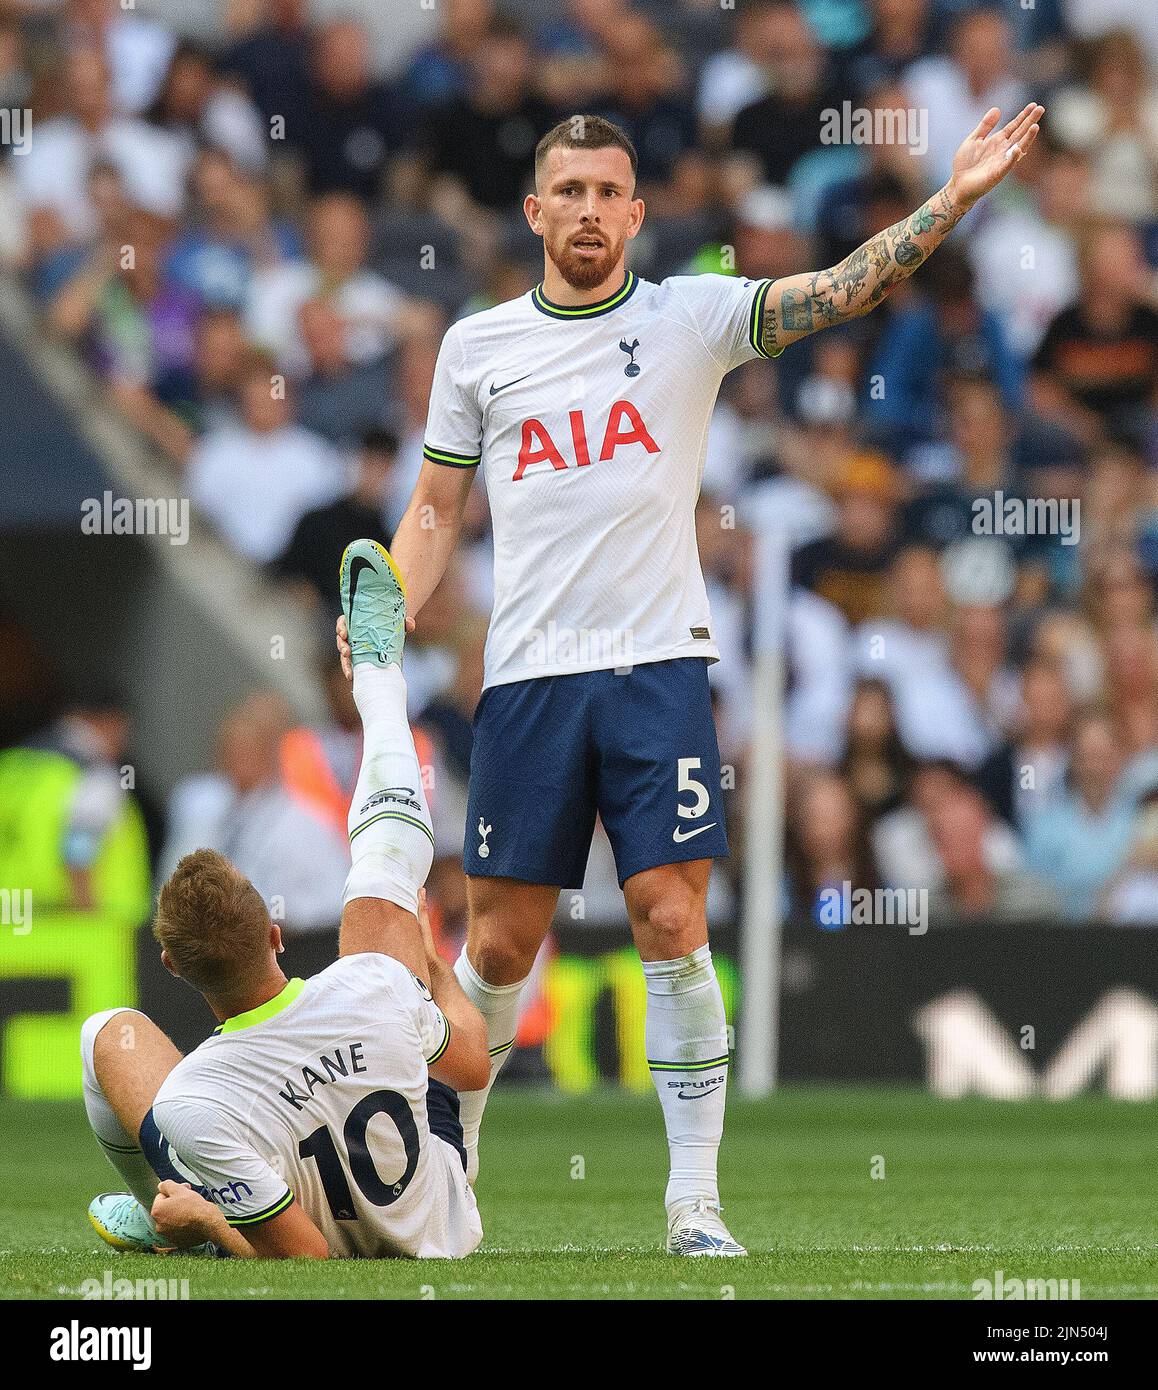 06 Aug 2022 - Tottenham Hotspur v Southampton - Premier League - Tottenham Hotspur Stadium  Tottenham's Pierre-Emile Hojbjerg and Harry Kane during the match against Southampton Picture Credit : © Mark Pain / Alamy Live News Stock Photo